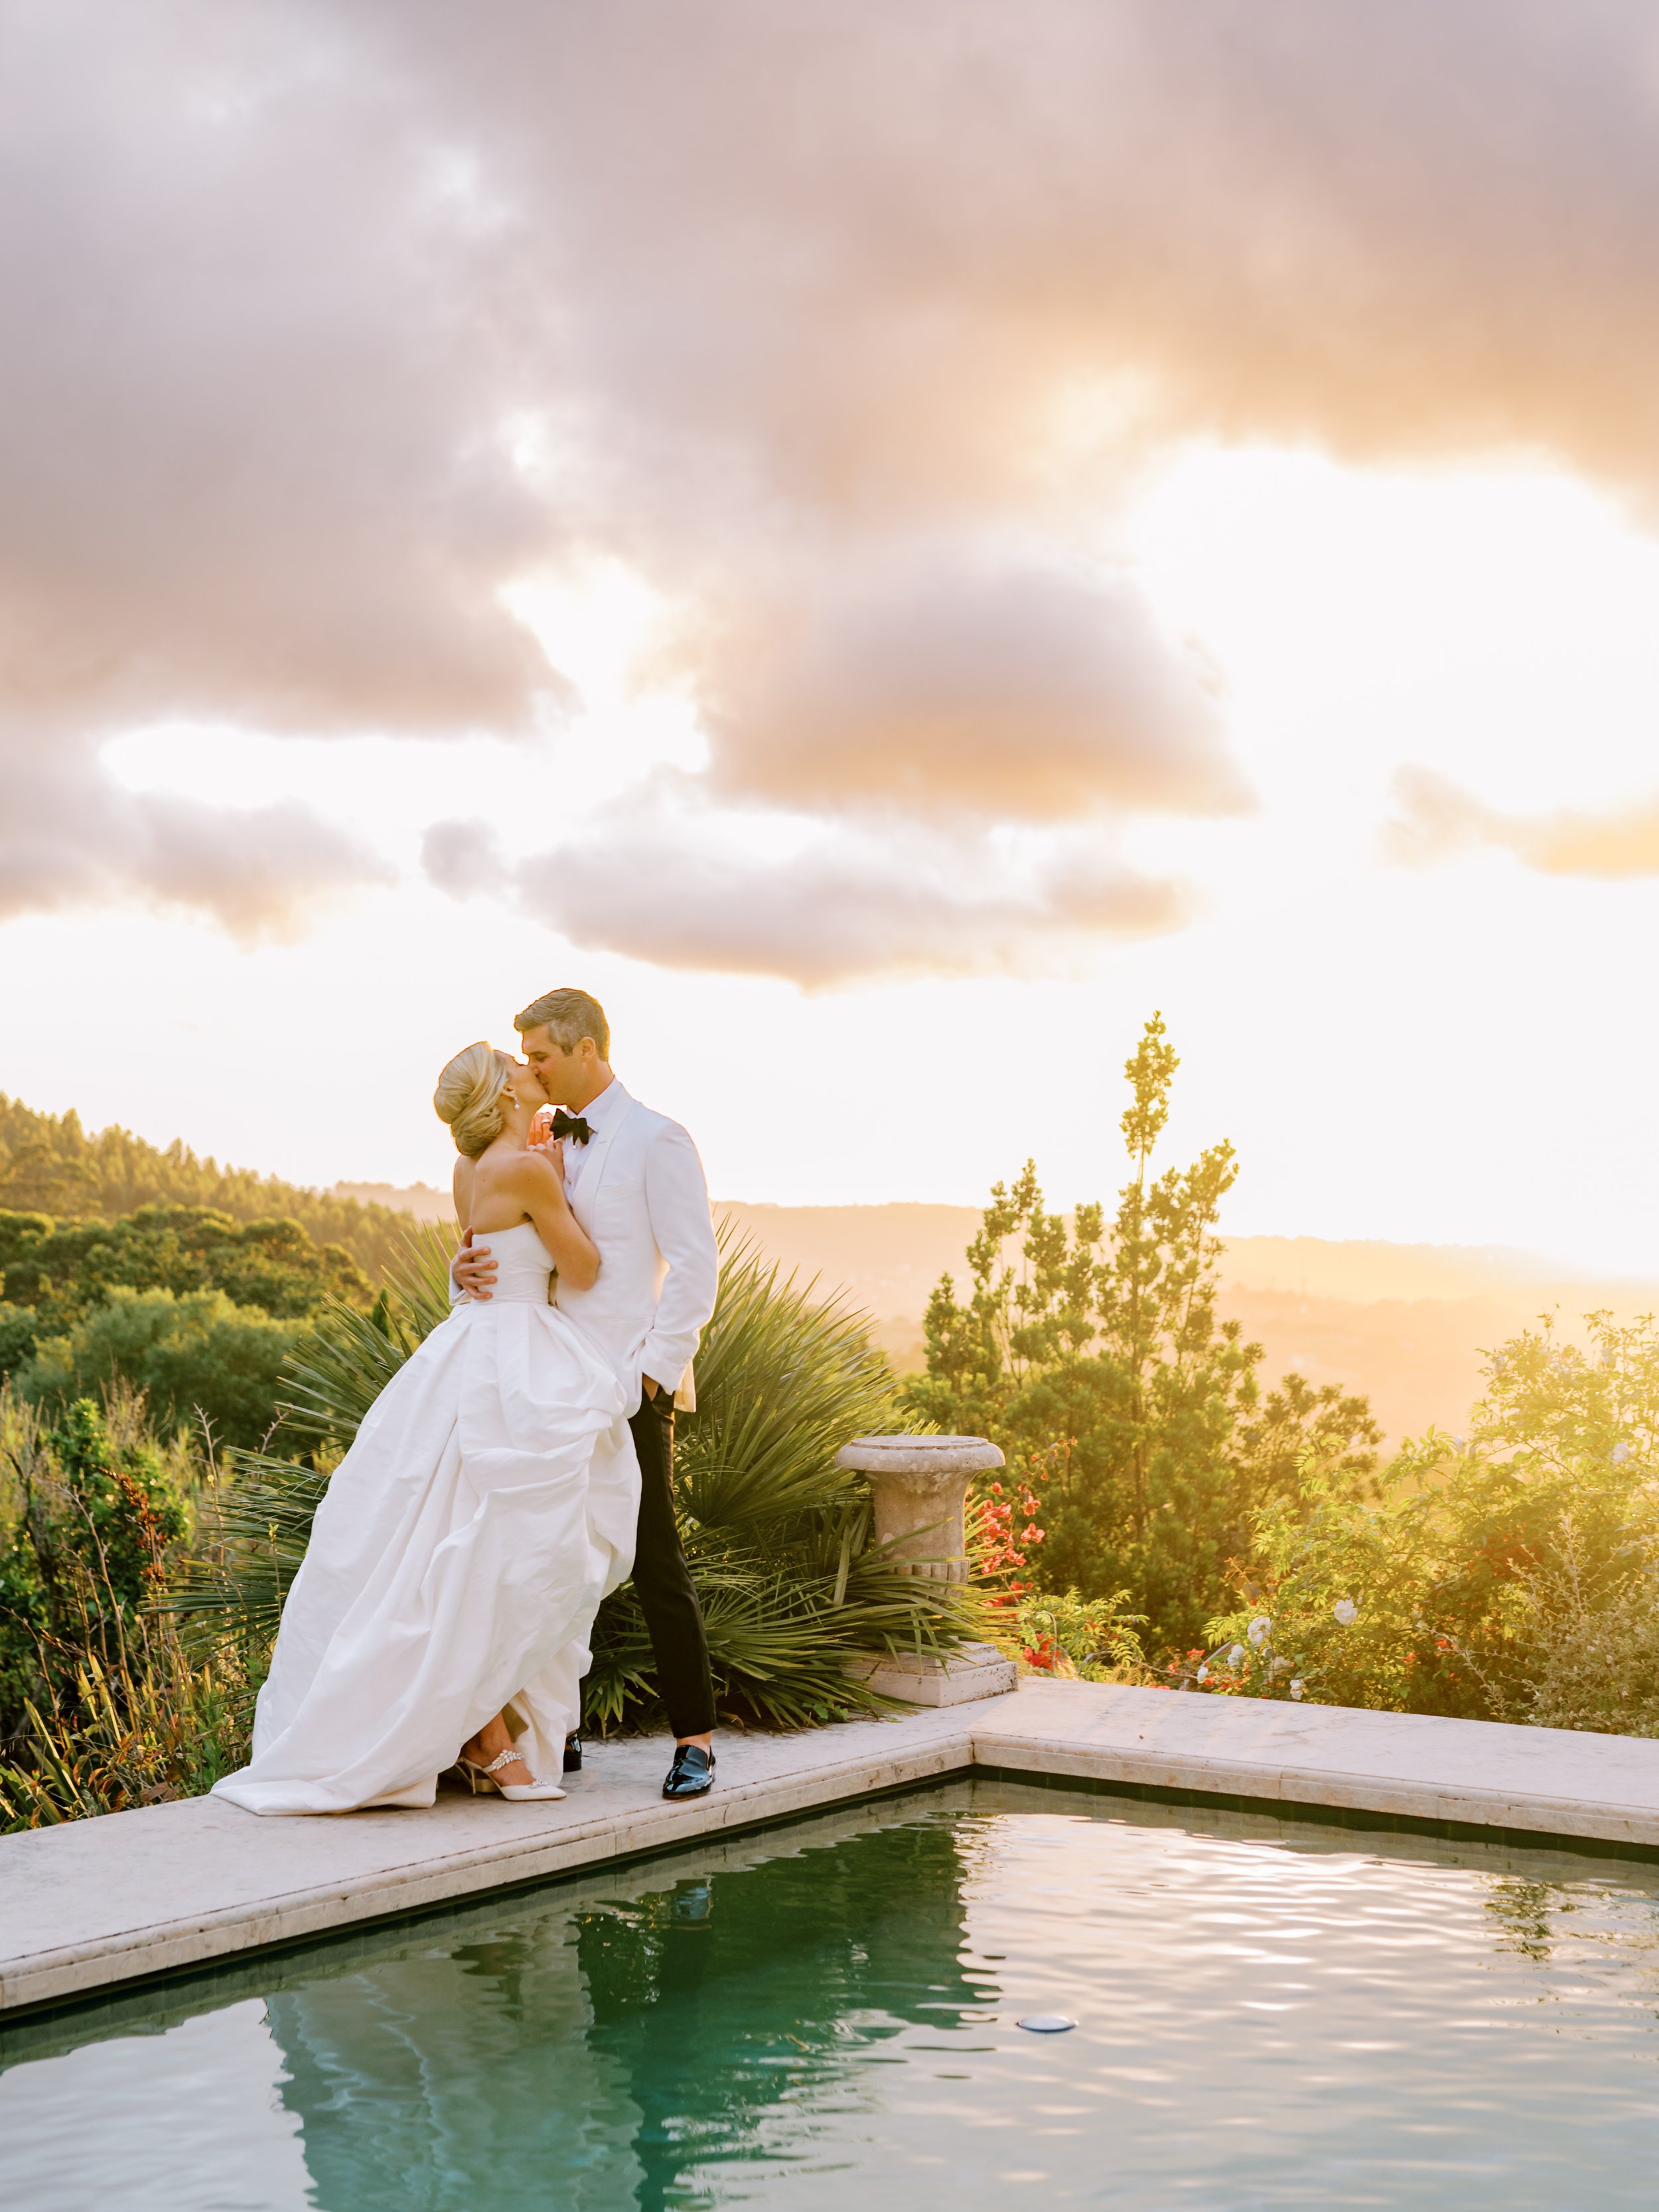 Bride and groom kissing at the edge of the pool at Quinta da Bela Vista with the view of the Sintra hills and the setting sun in the background, painting everything in an orange-yellow-purple color